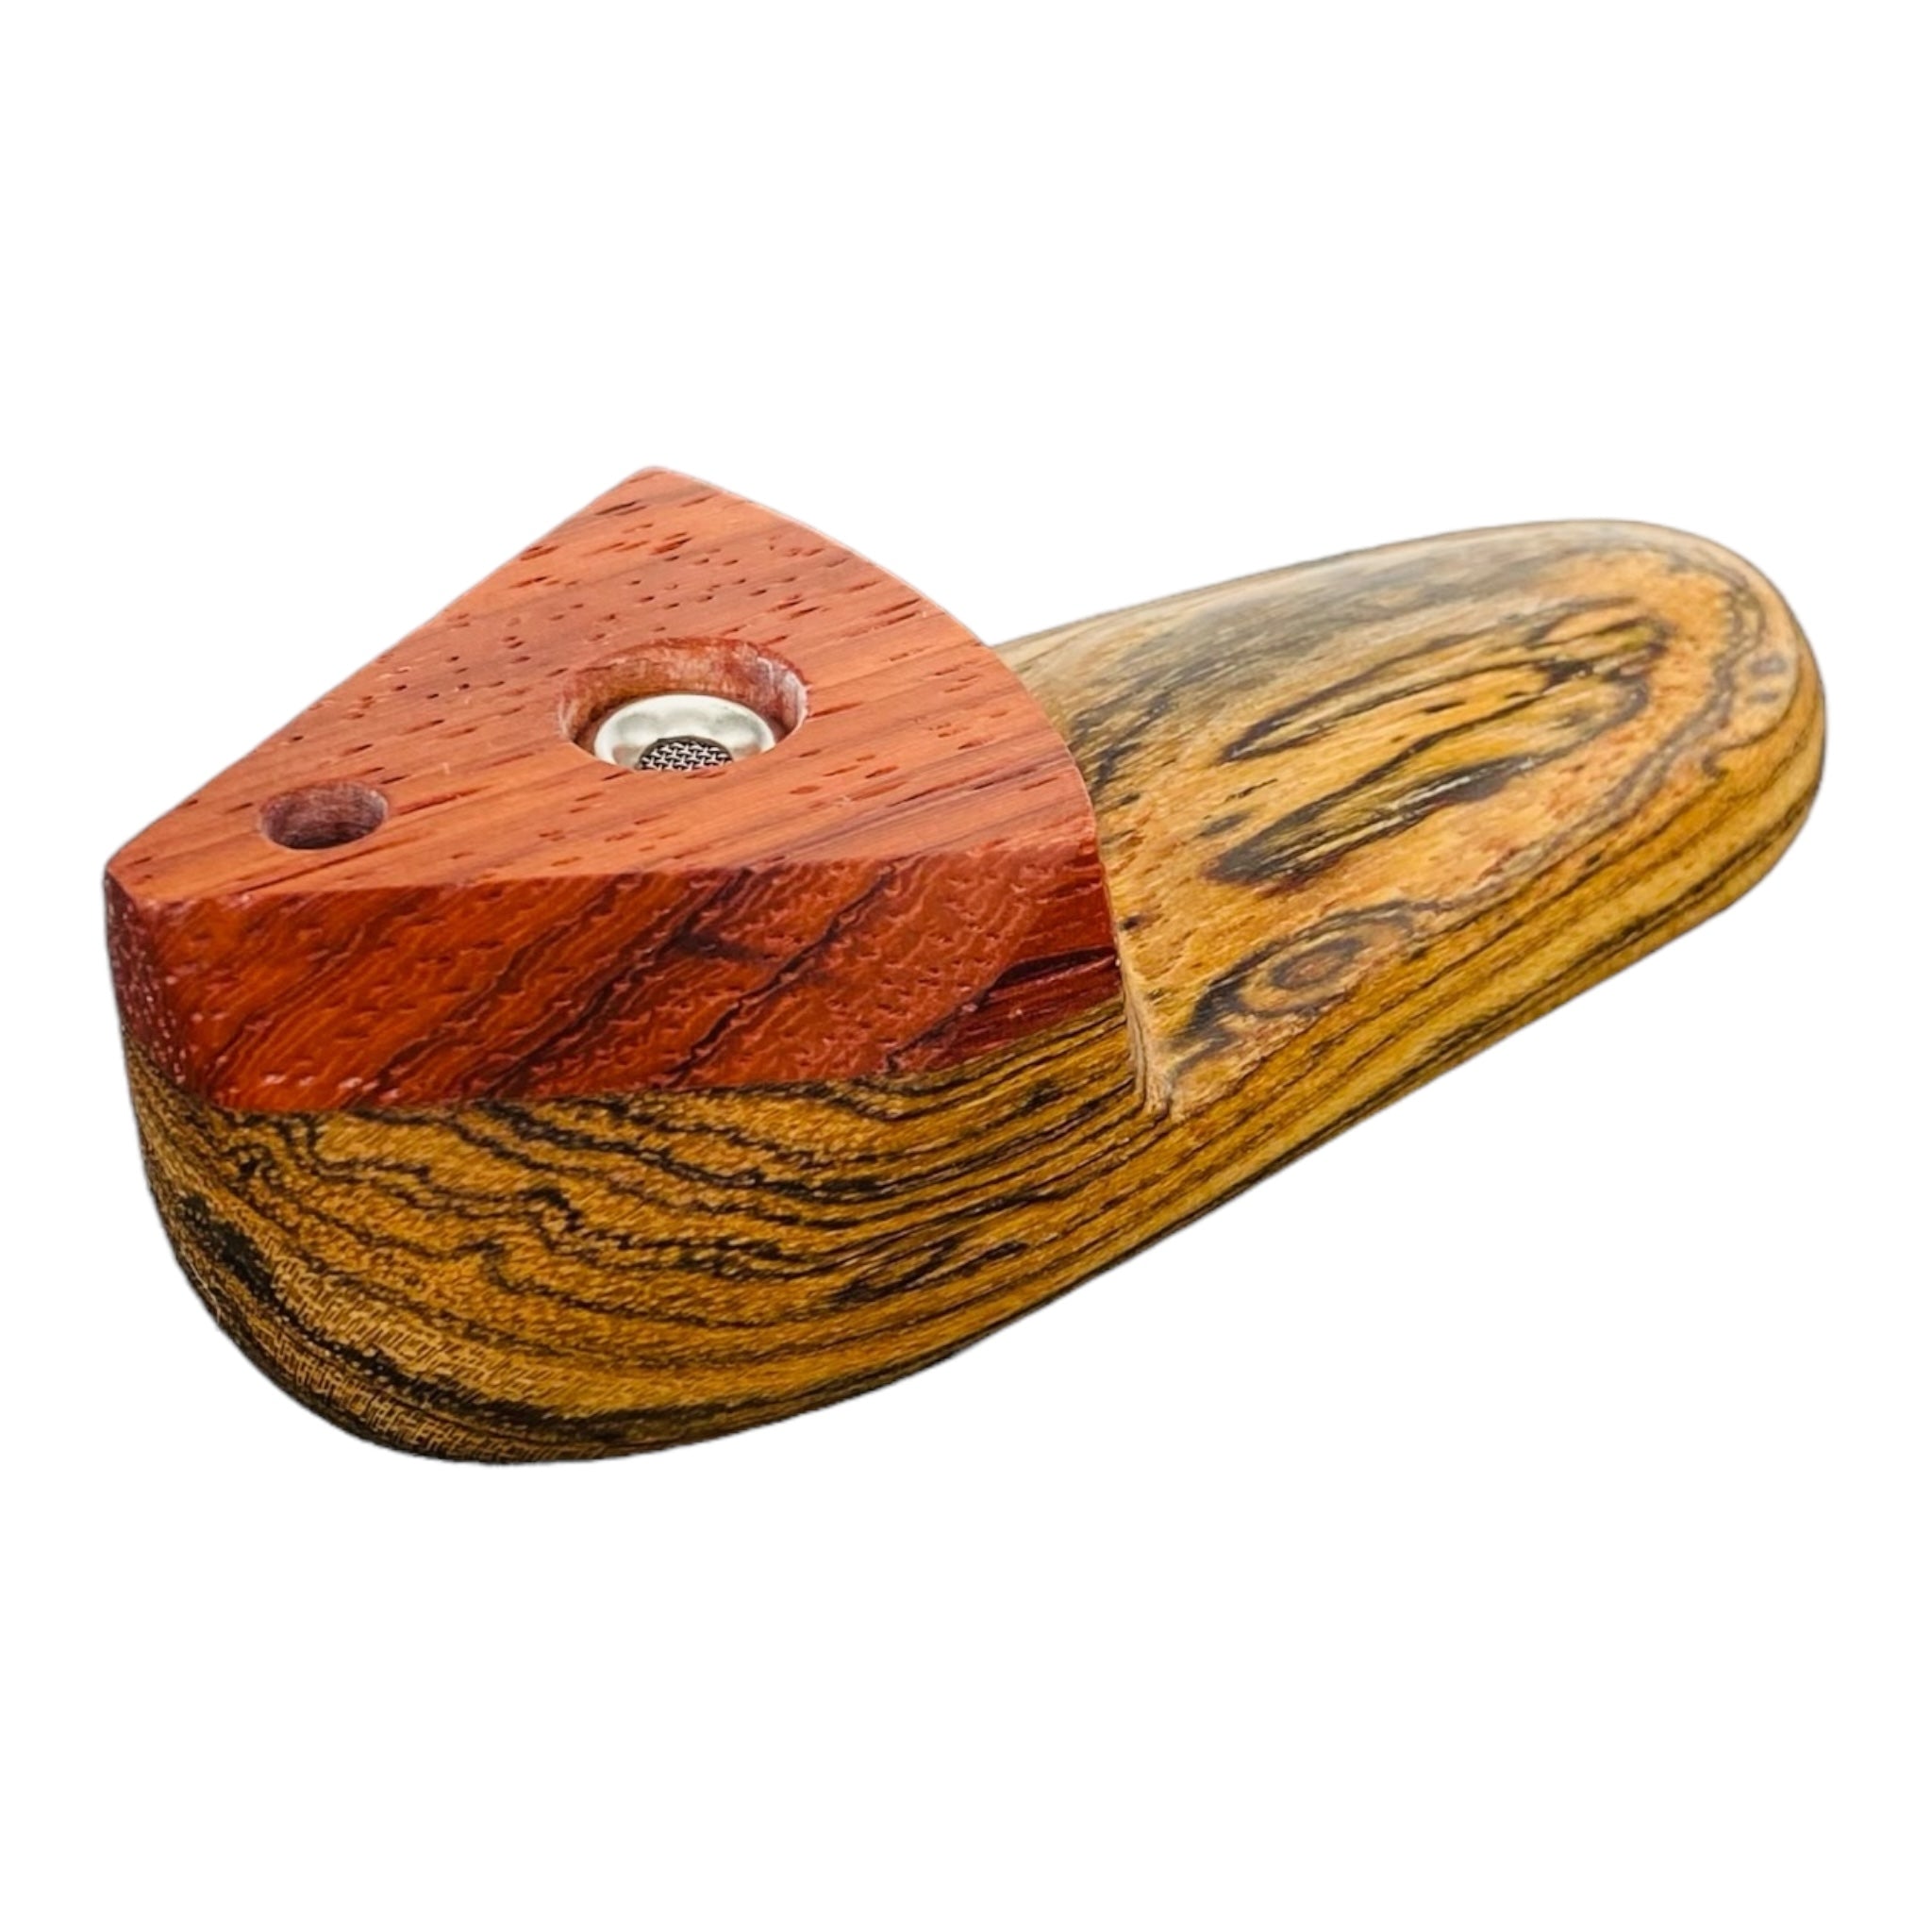 Wood Hand Pipe - Large Oval Hand Pipe With Triangle Lid With Vent